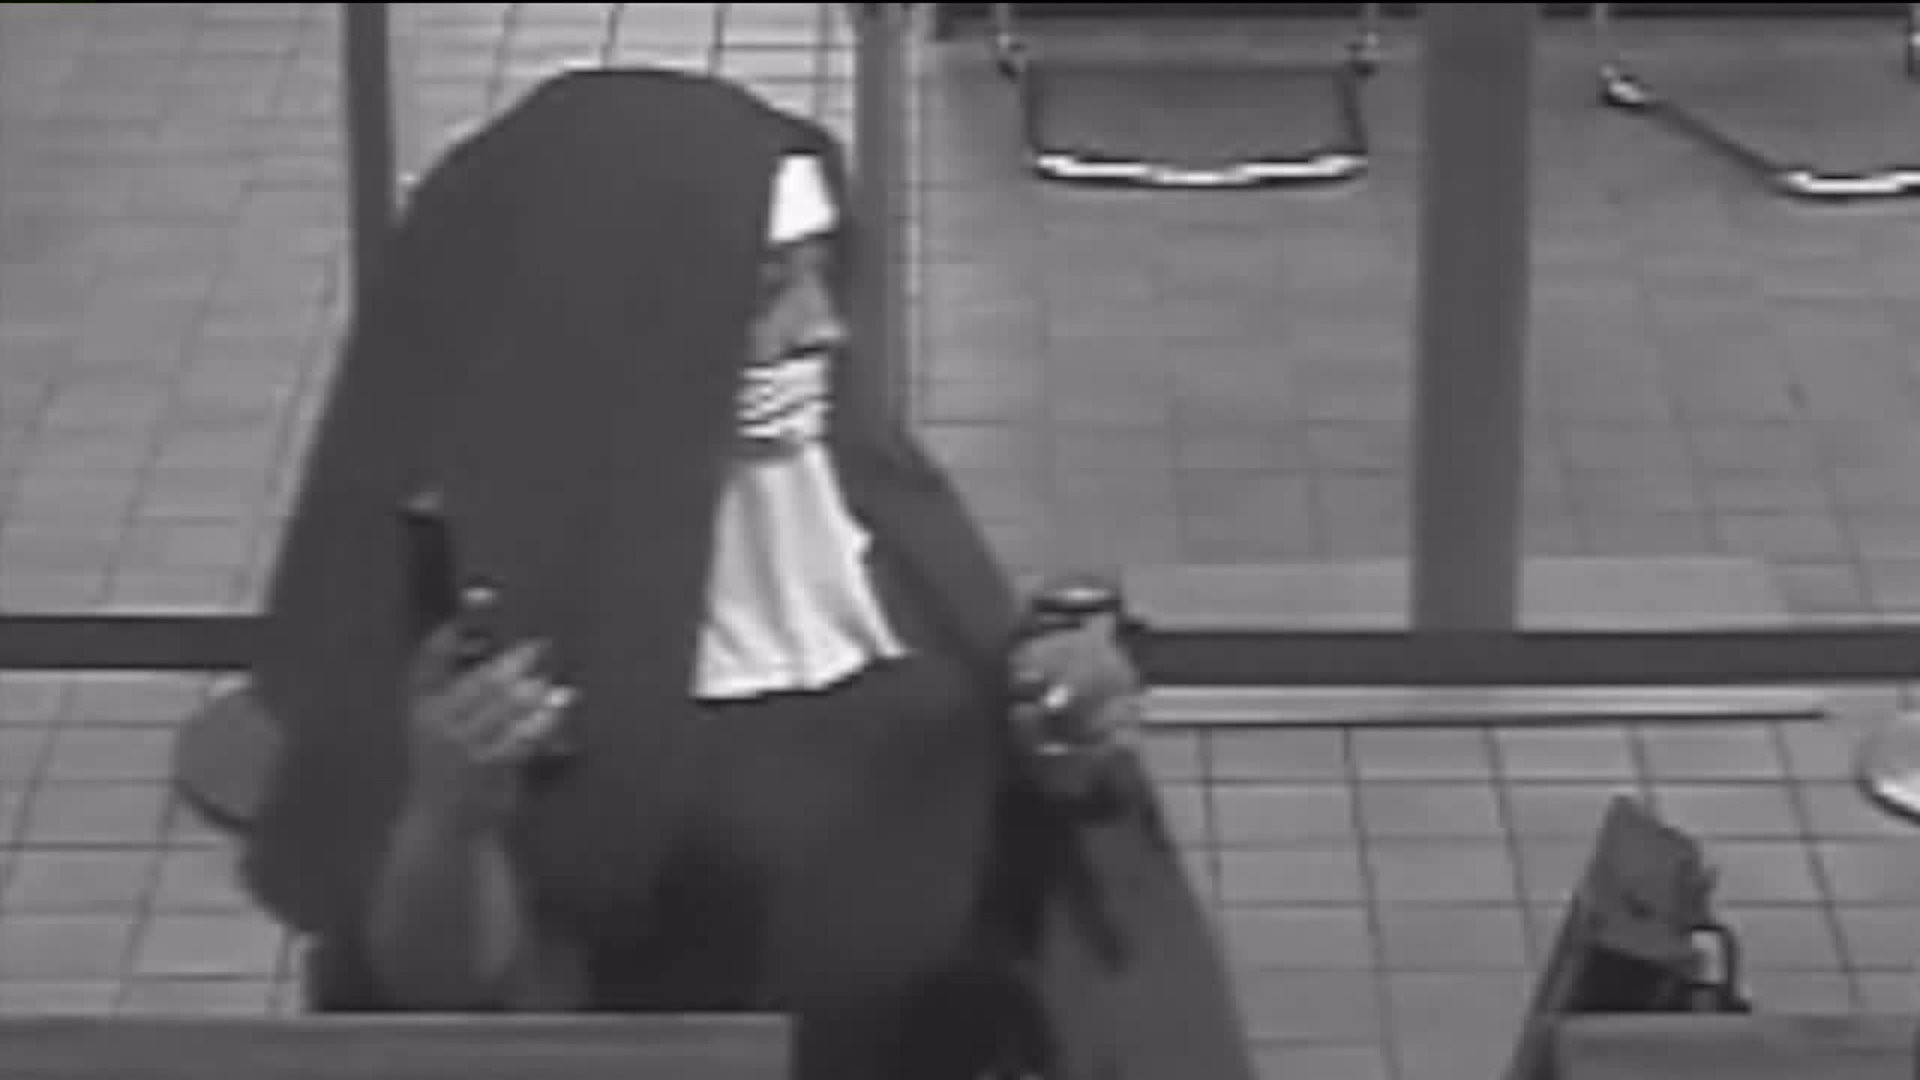 Bank Robbers Dressed as Nuns Sentenced to Prison